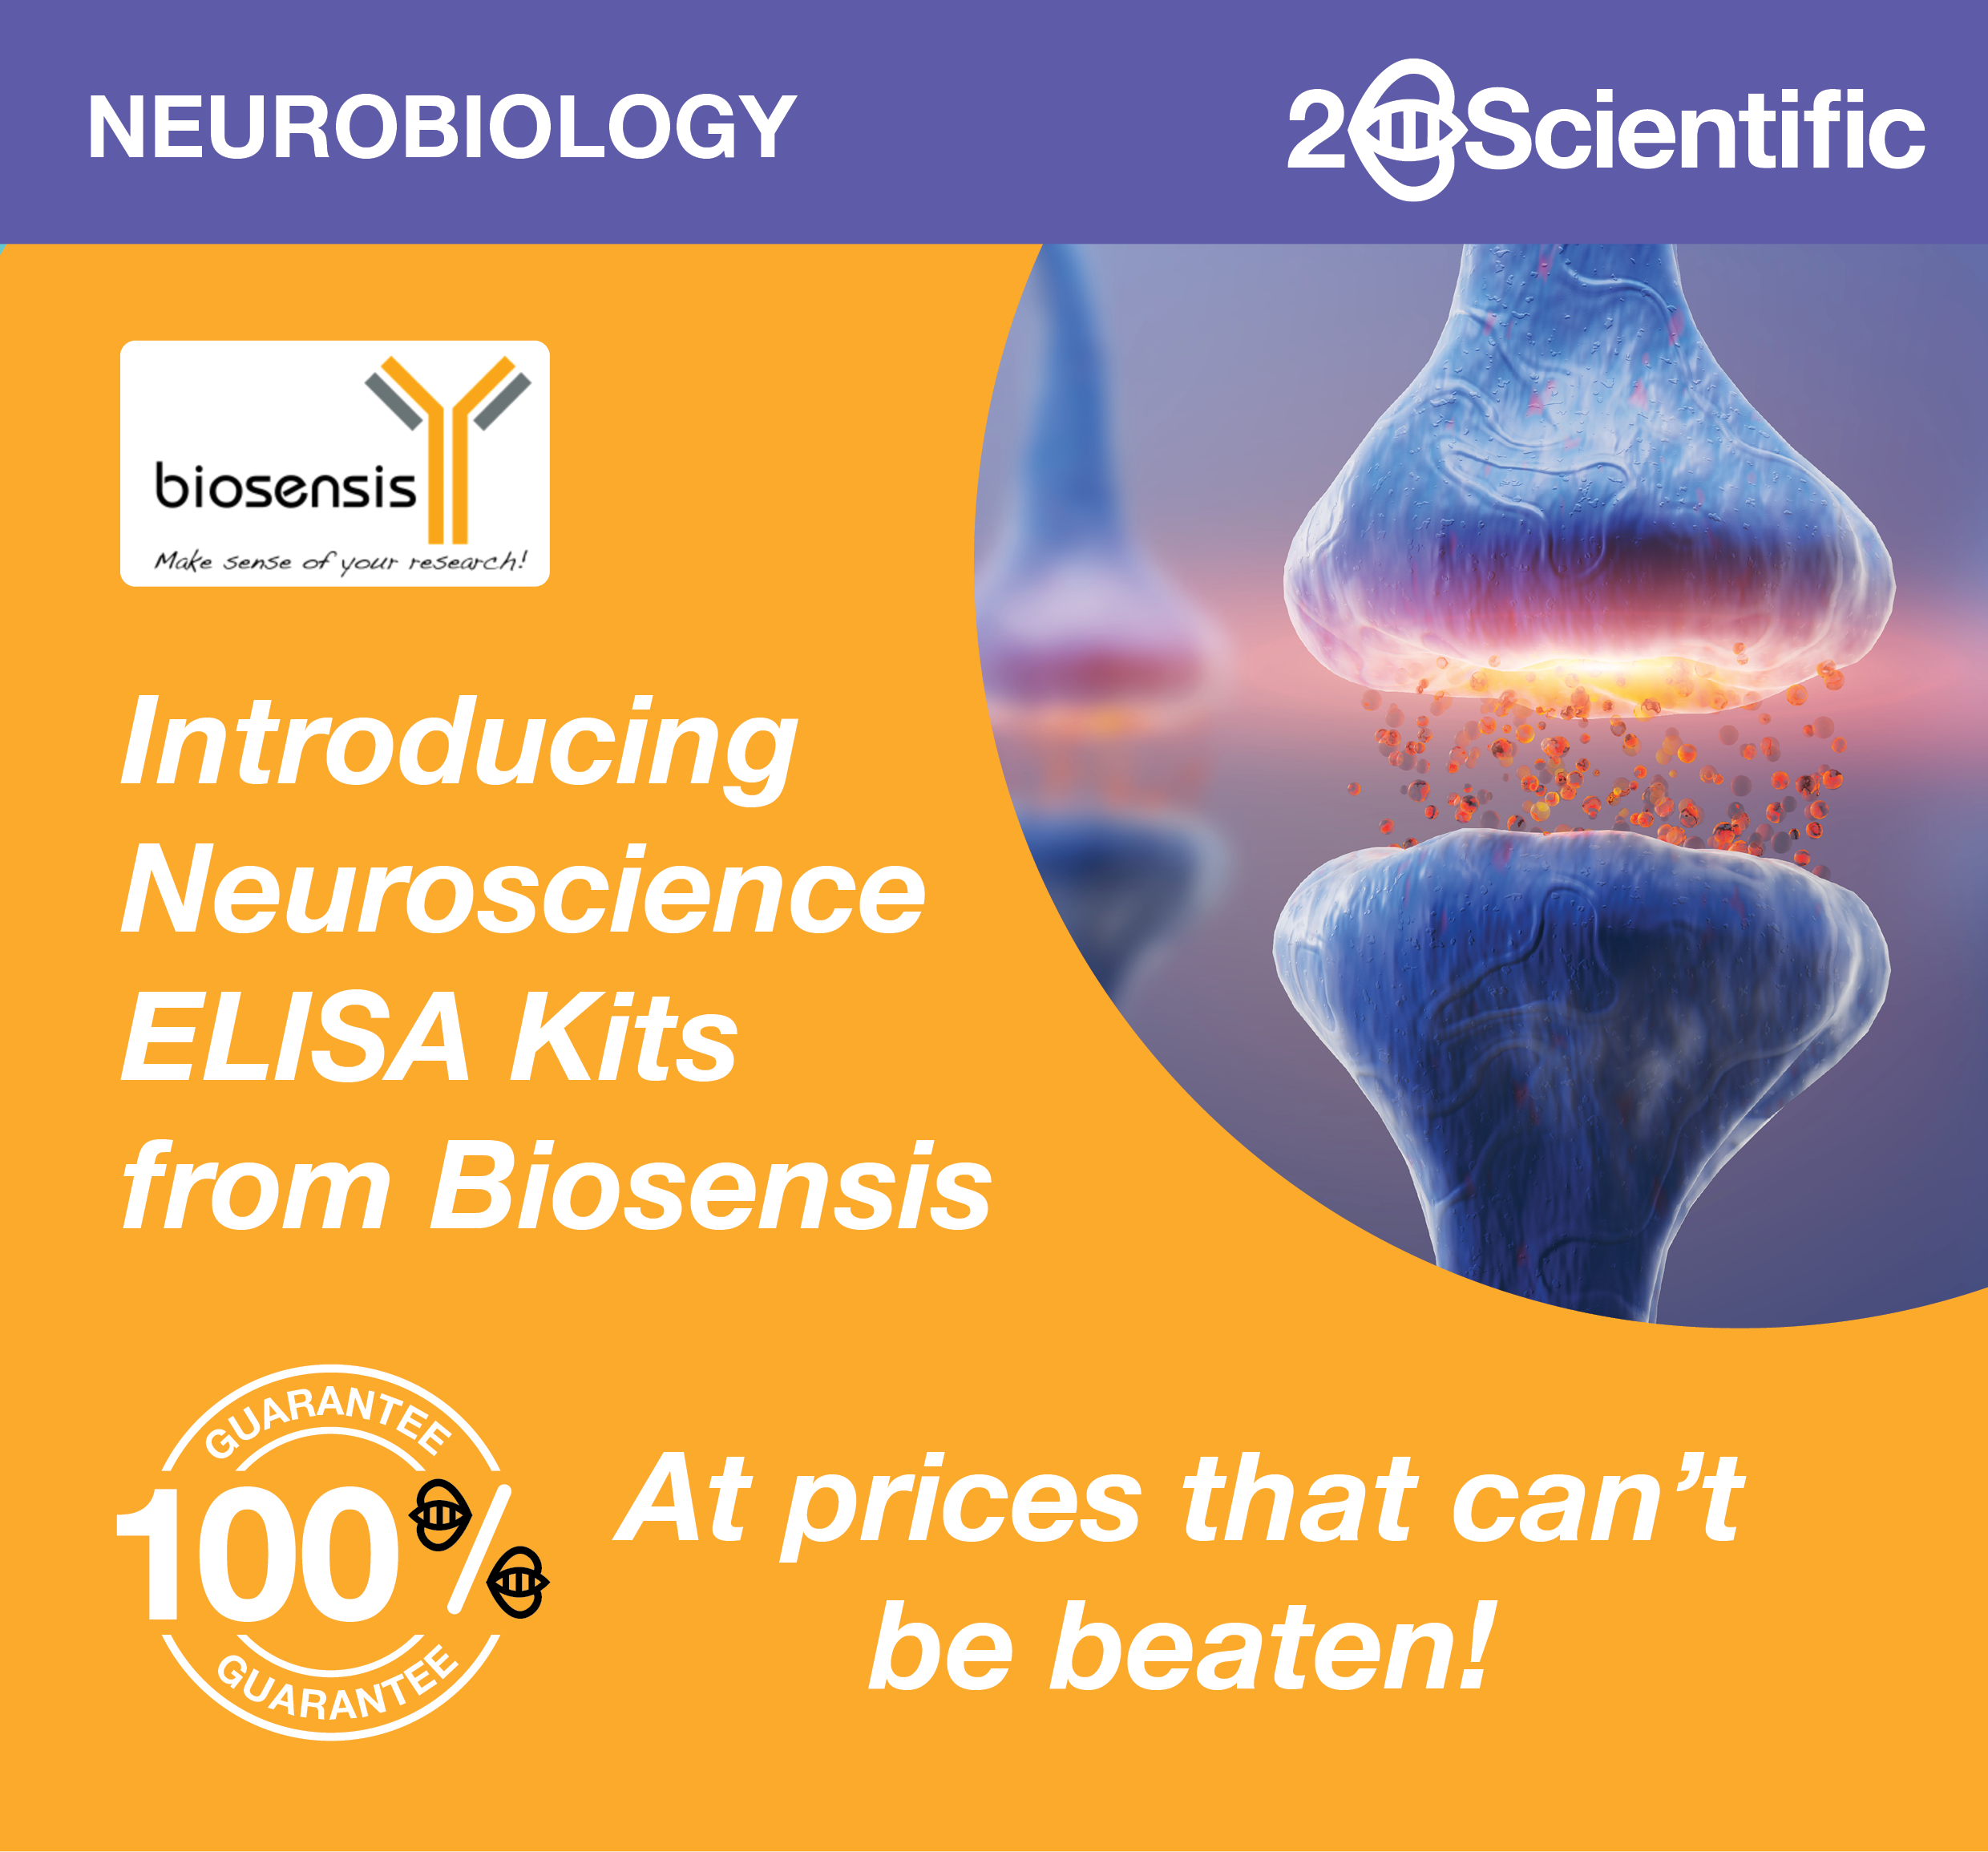 Biosensis Deep Cut Promotions Available on Selected Products for March Only!